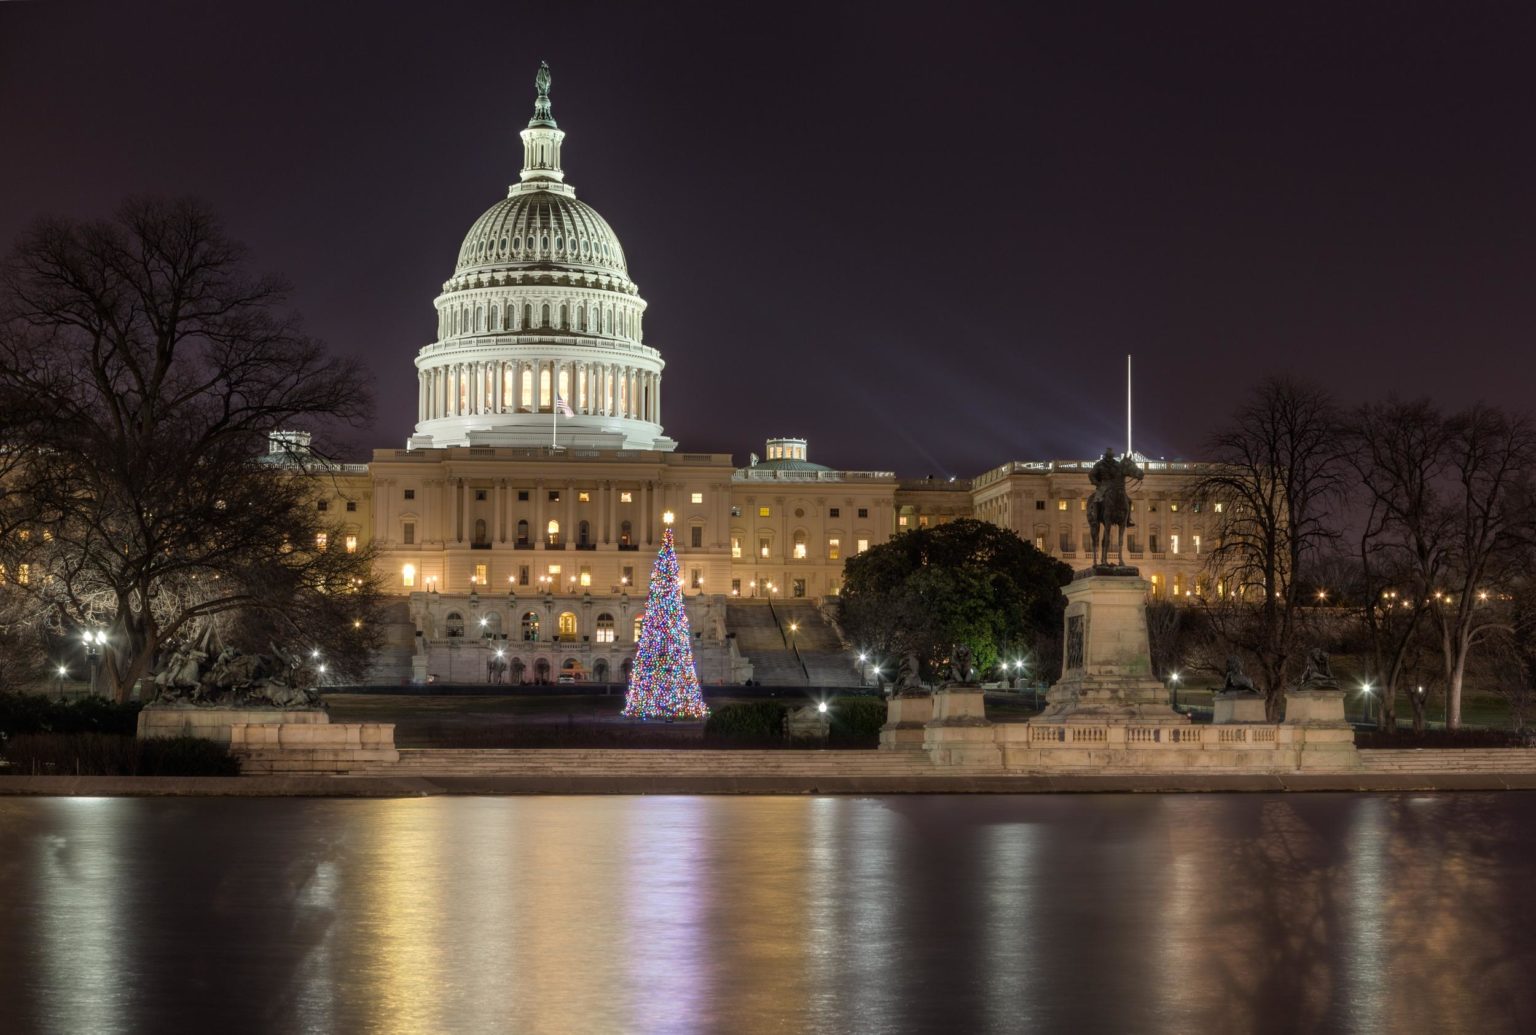 United States Capitol Building In Washington Dc Photo Guide